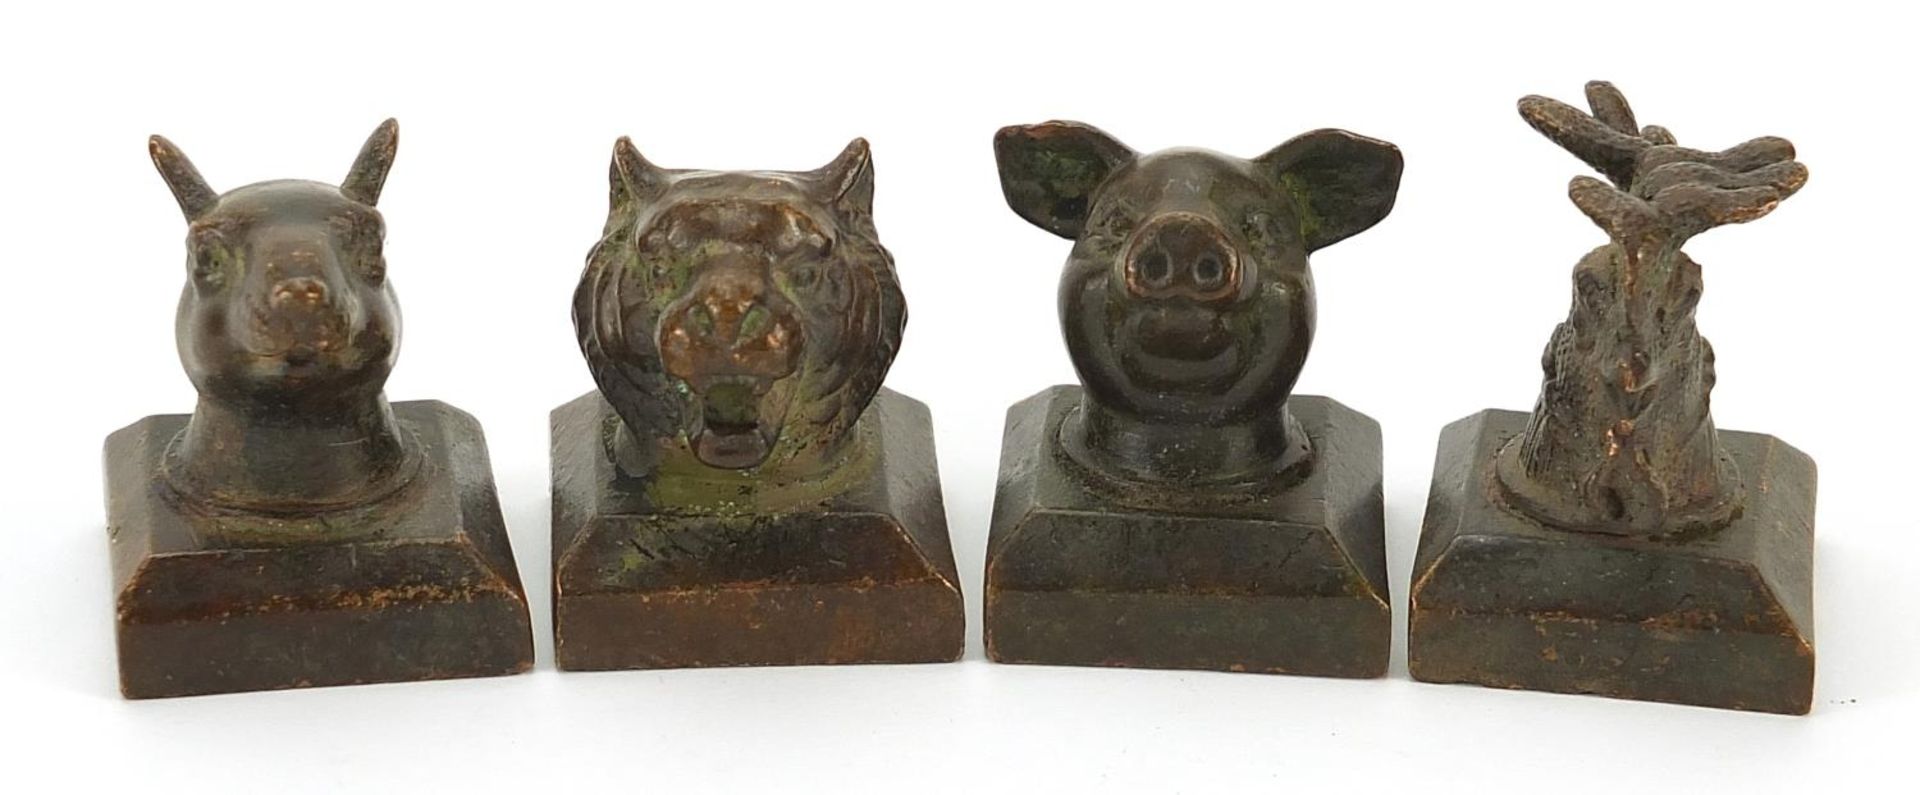 Four Chinese patinated bronze desk seals, the largest 4cm high